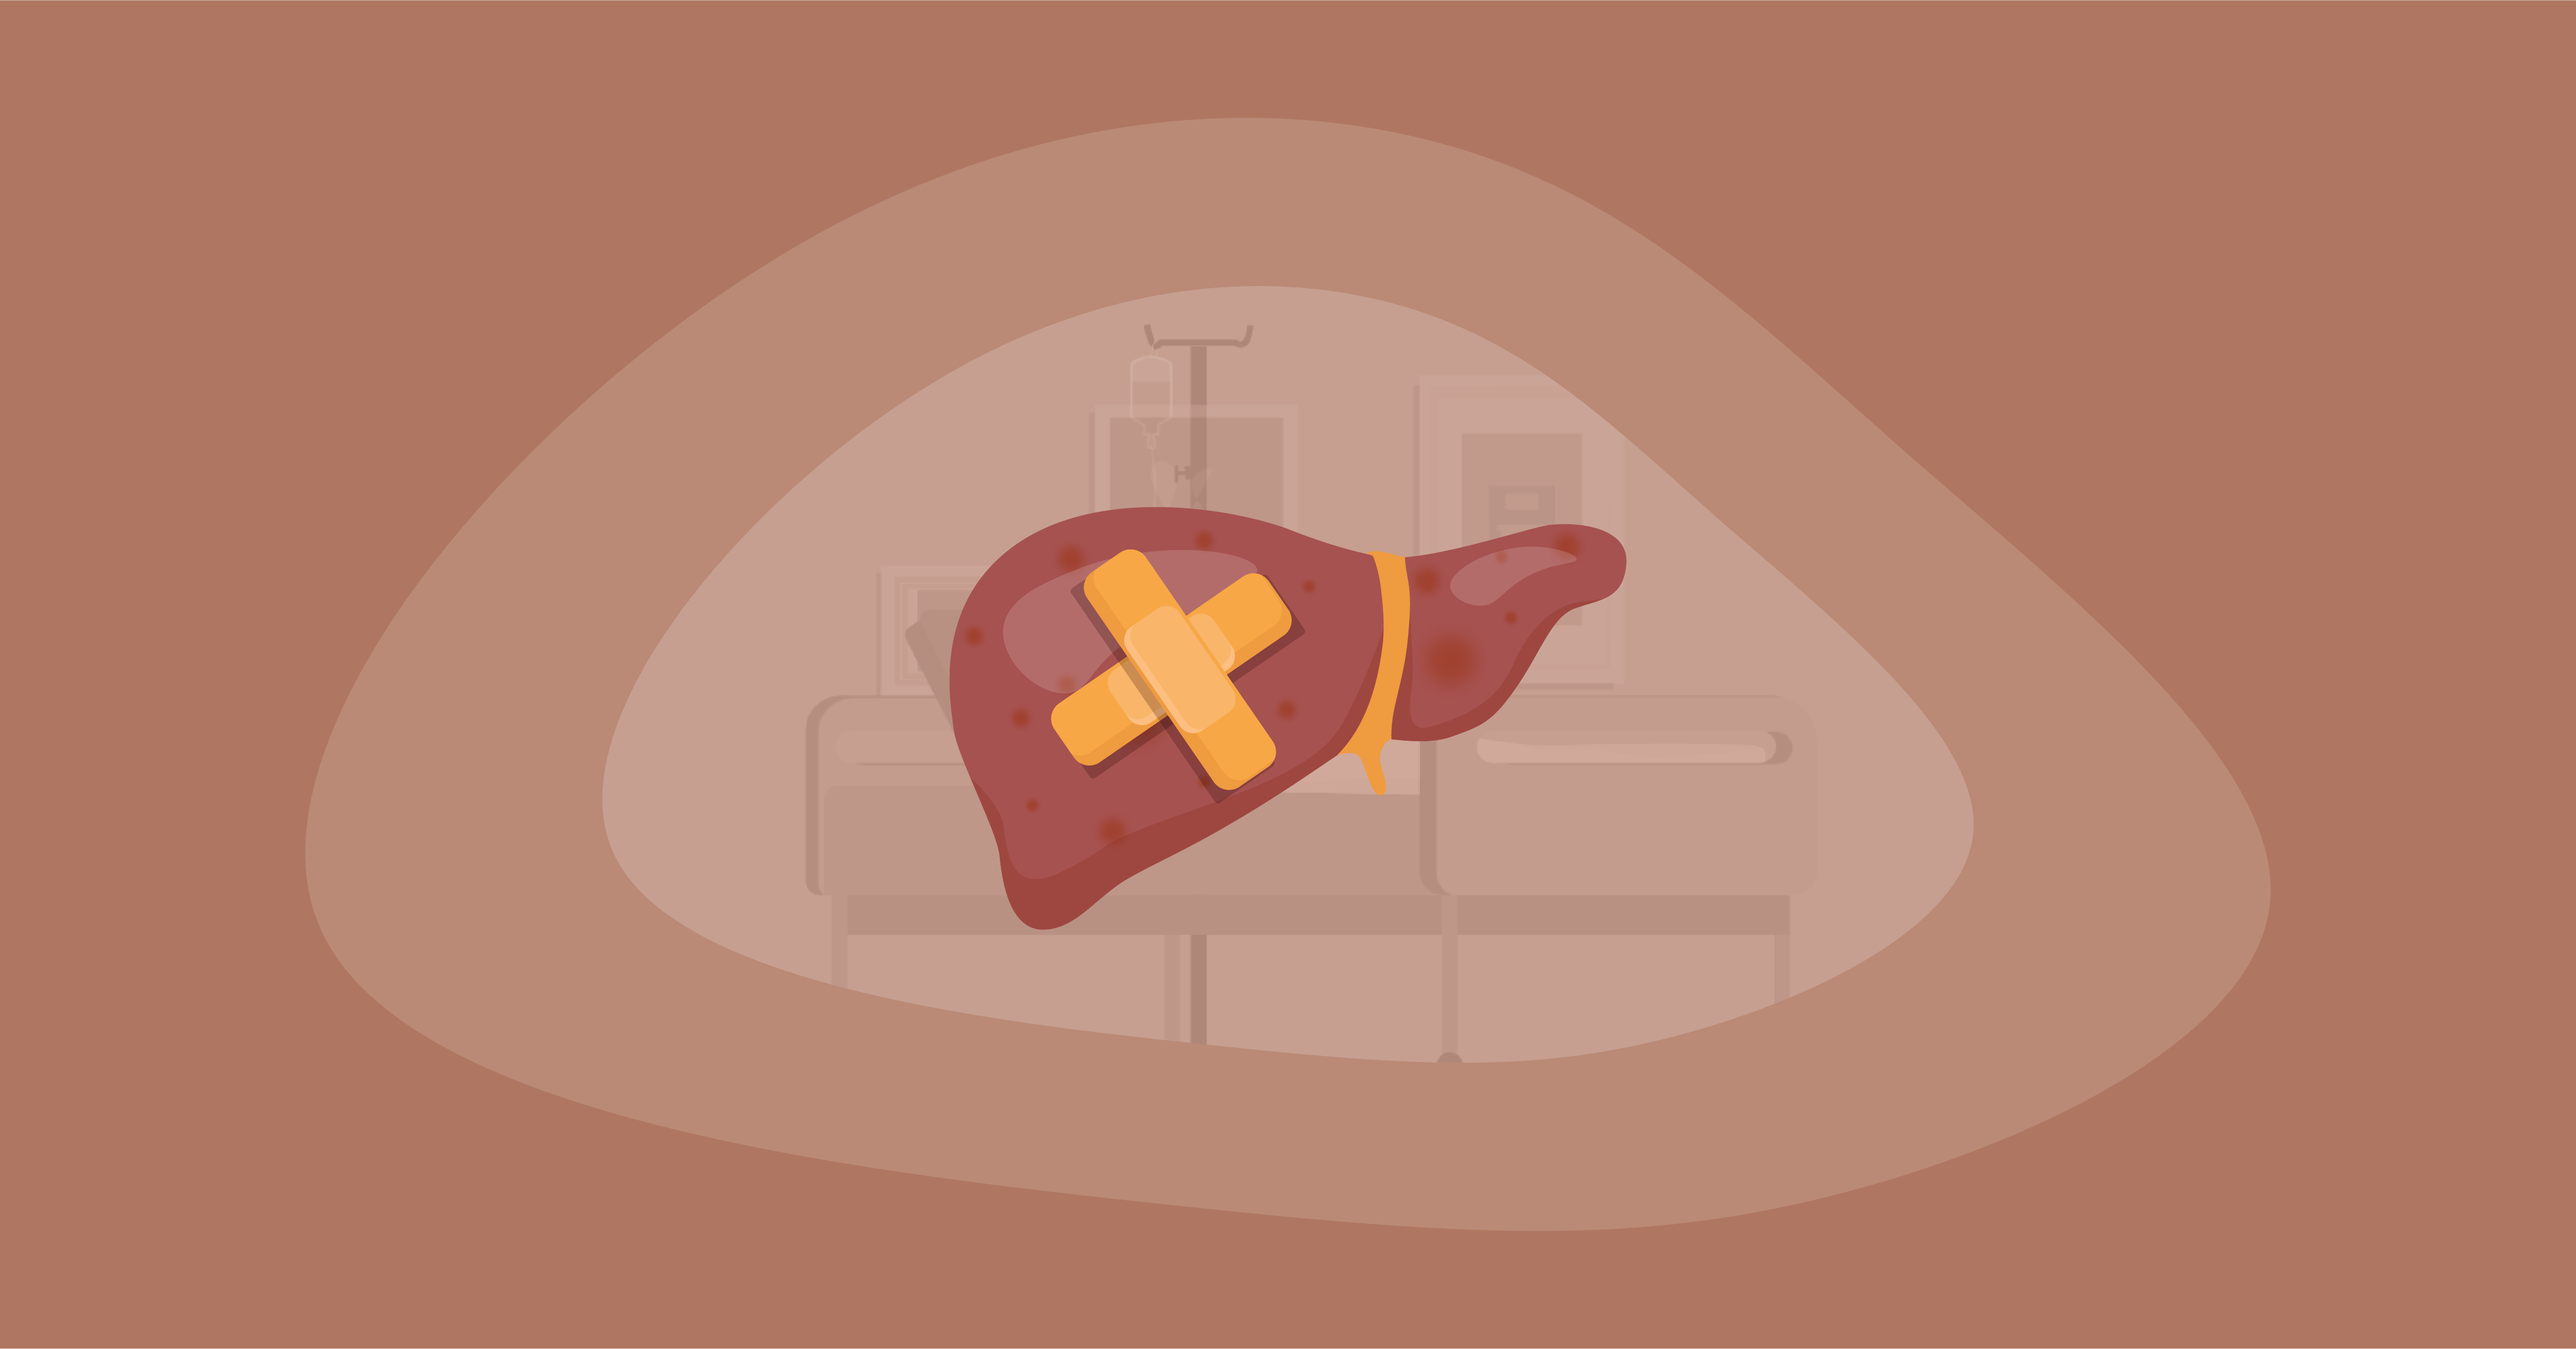 Attempted illustration of a liver with a disease